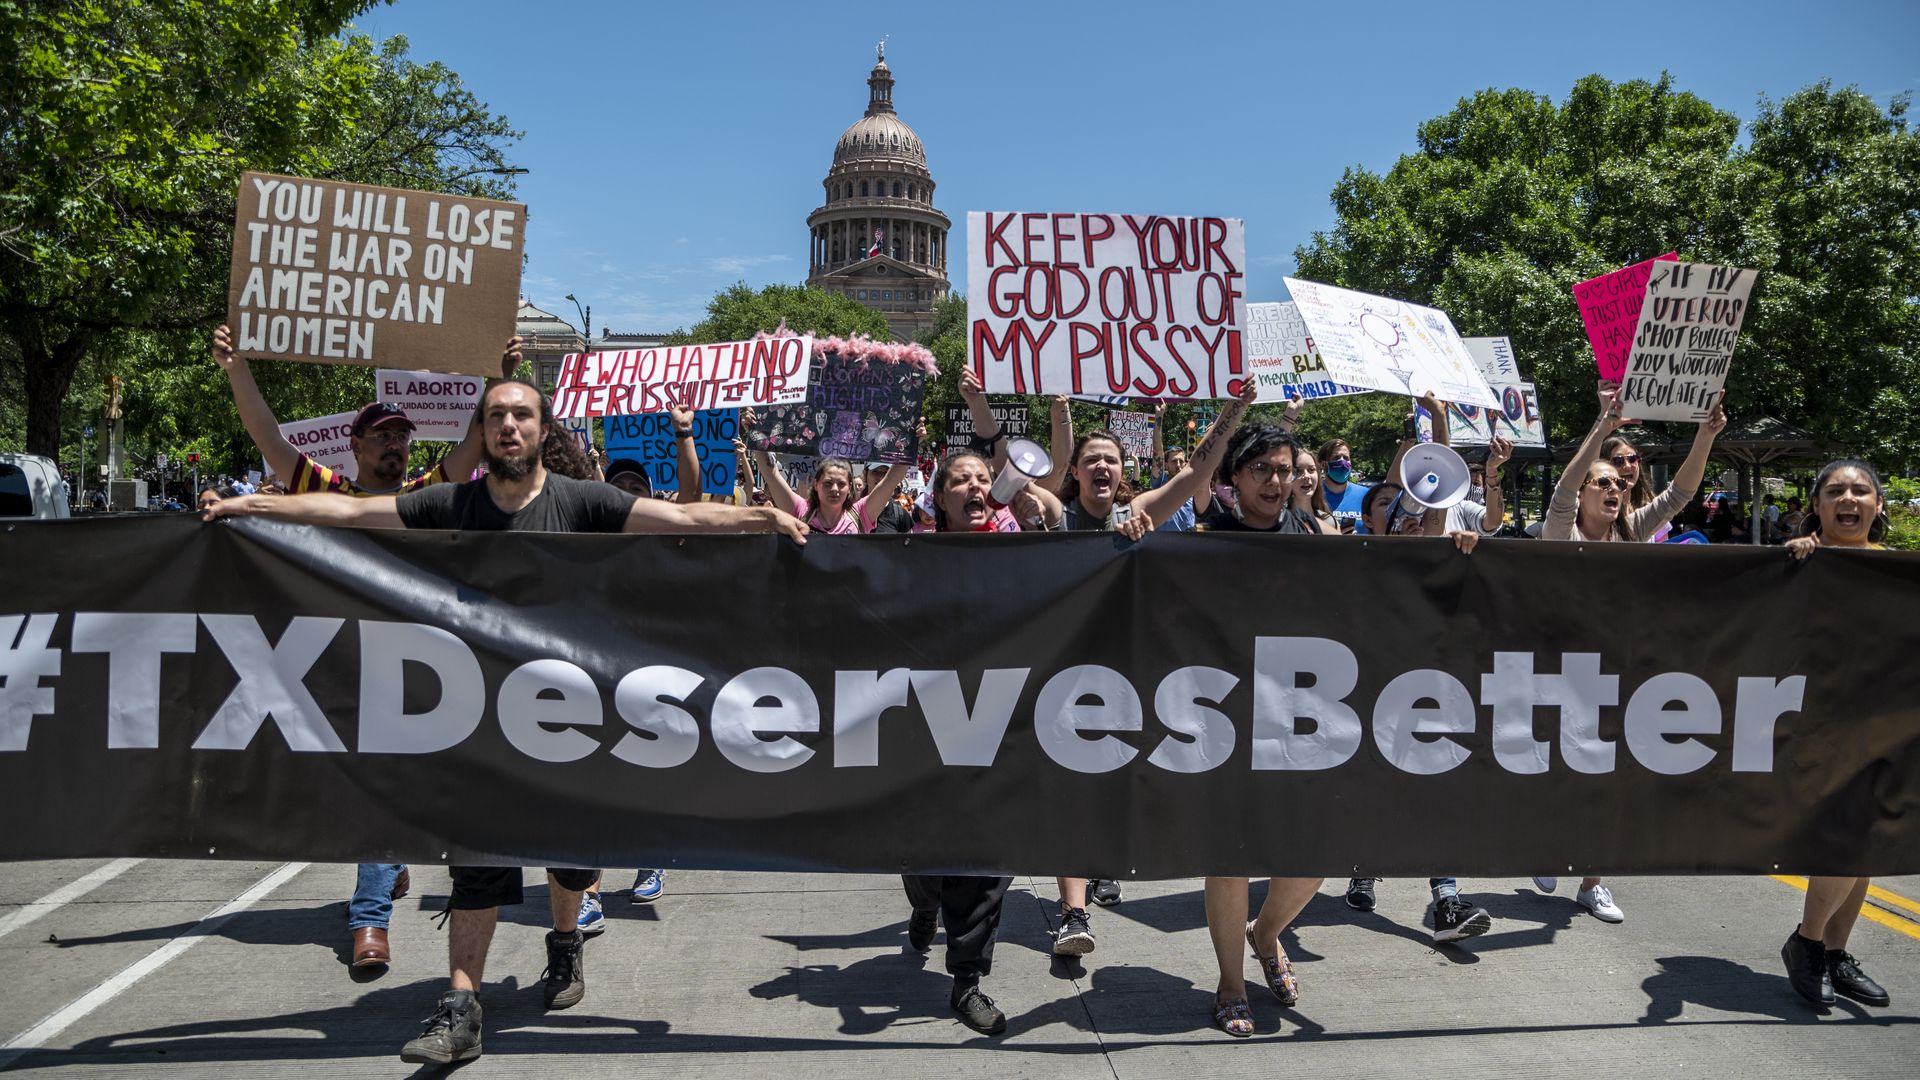 Picture of pro-choice protesters holding a banner that says #TXDeservesBetter